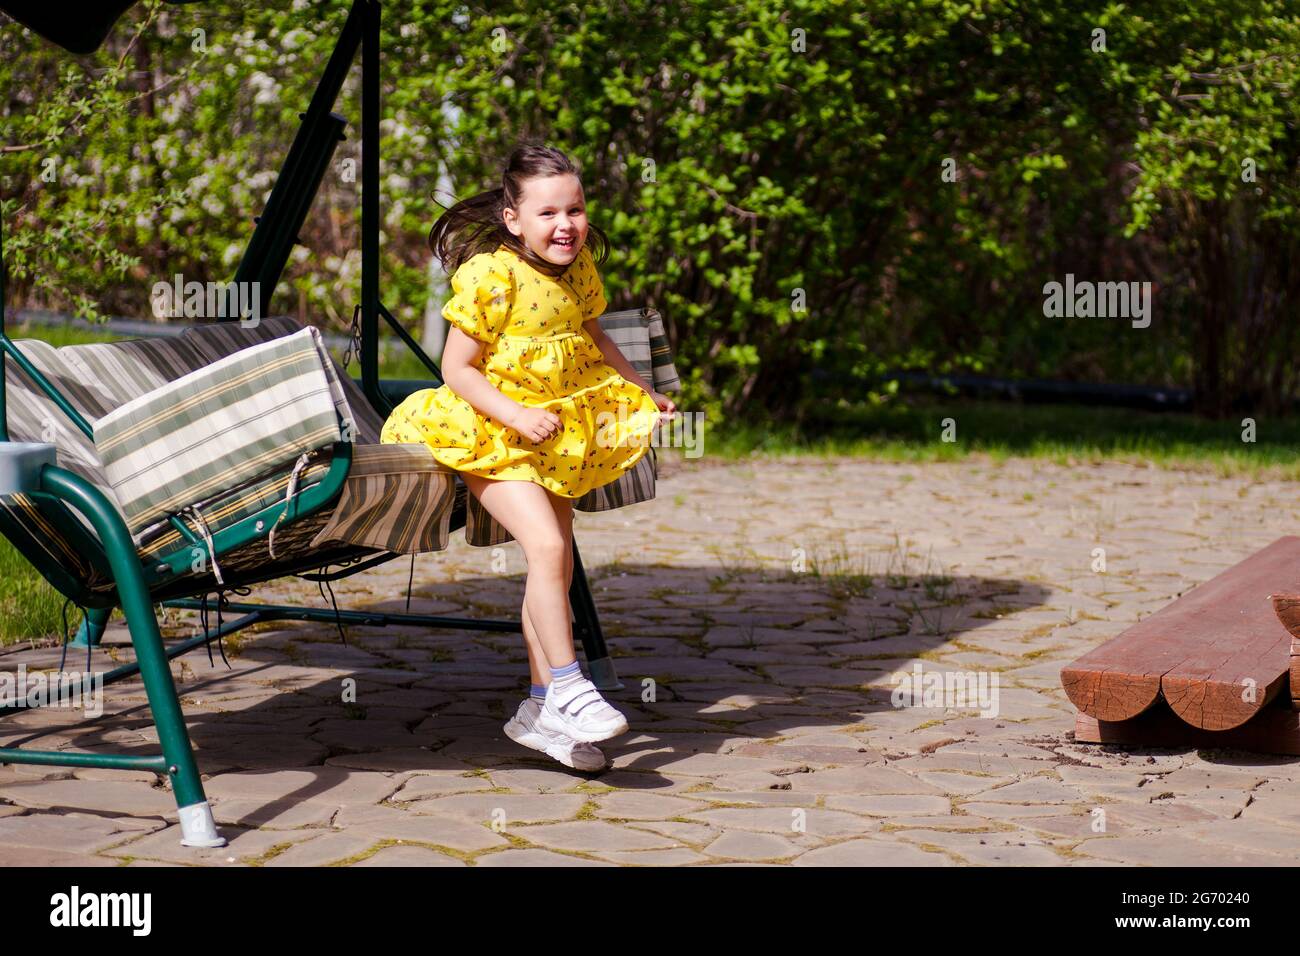 frozen moment of movement or jump, a smiling girl in a yellow dress jumps into the air from a garden swing on a sunny day on a family vacation Stock Photo